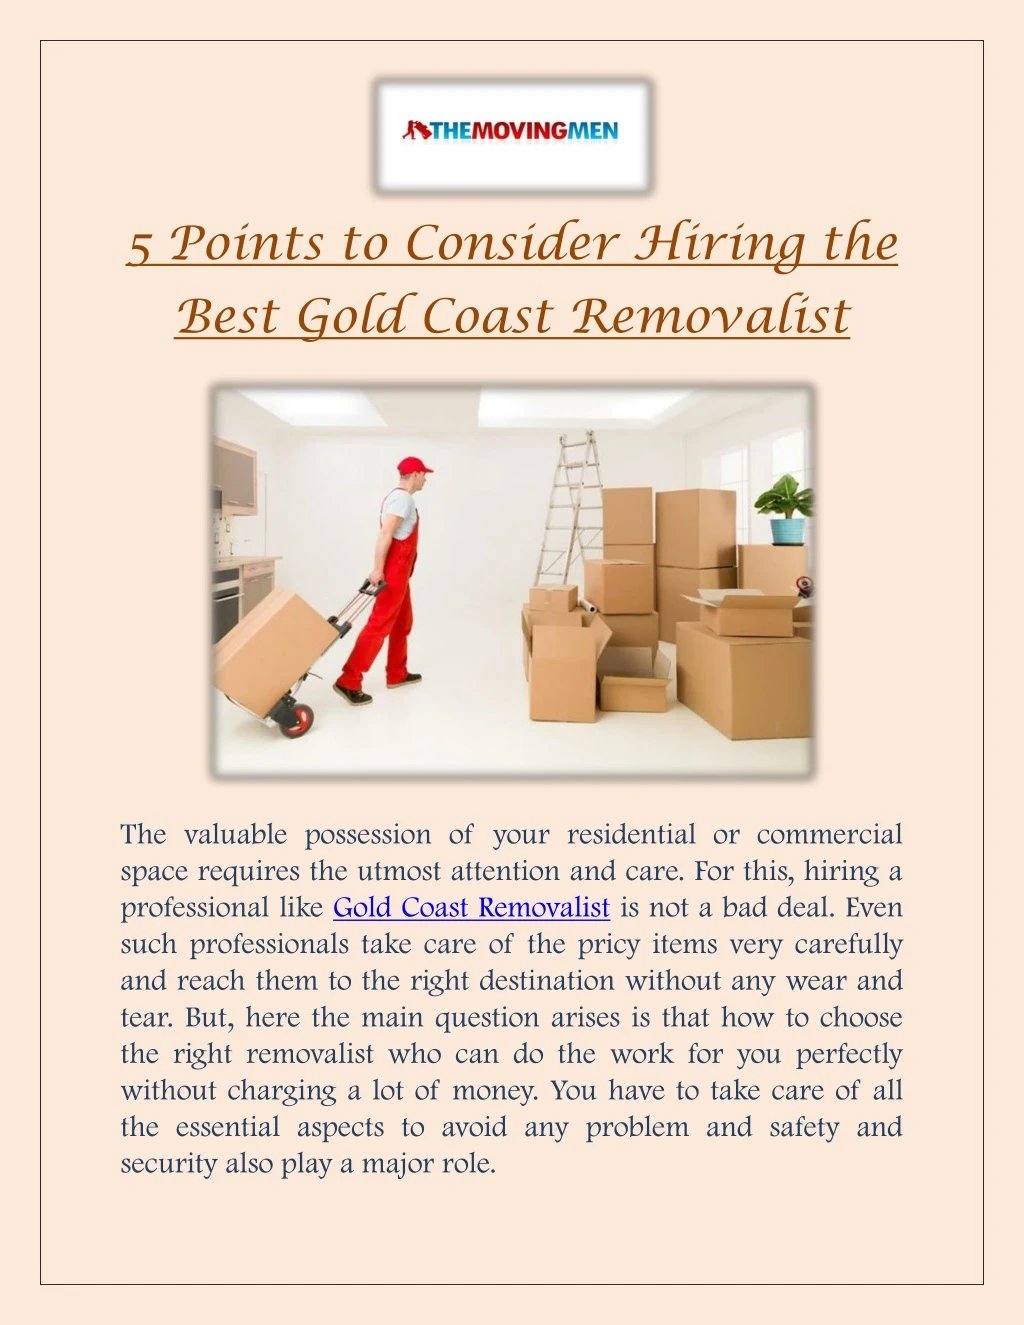 5 points to consider hiring the best gold coast